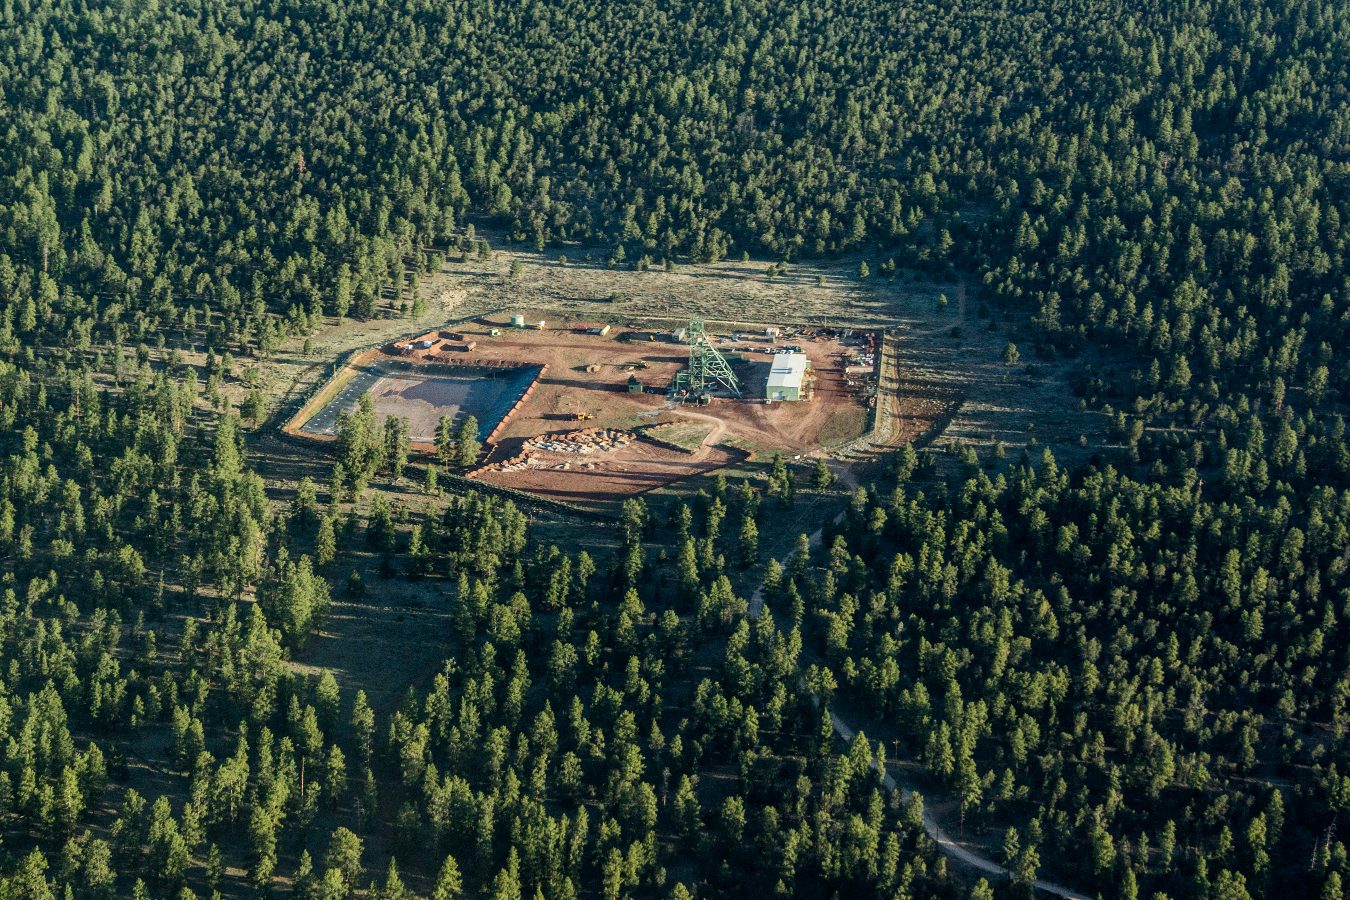 An aerial view of a uranium mine in the middle of a dense forest.